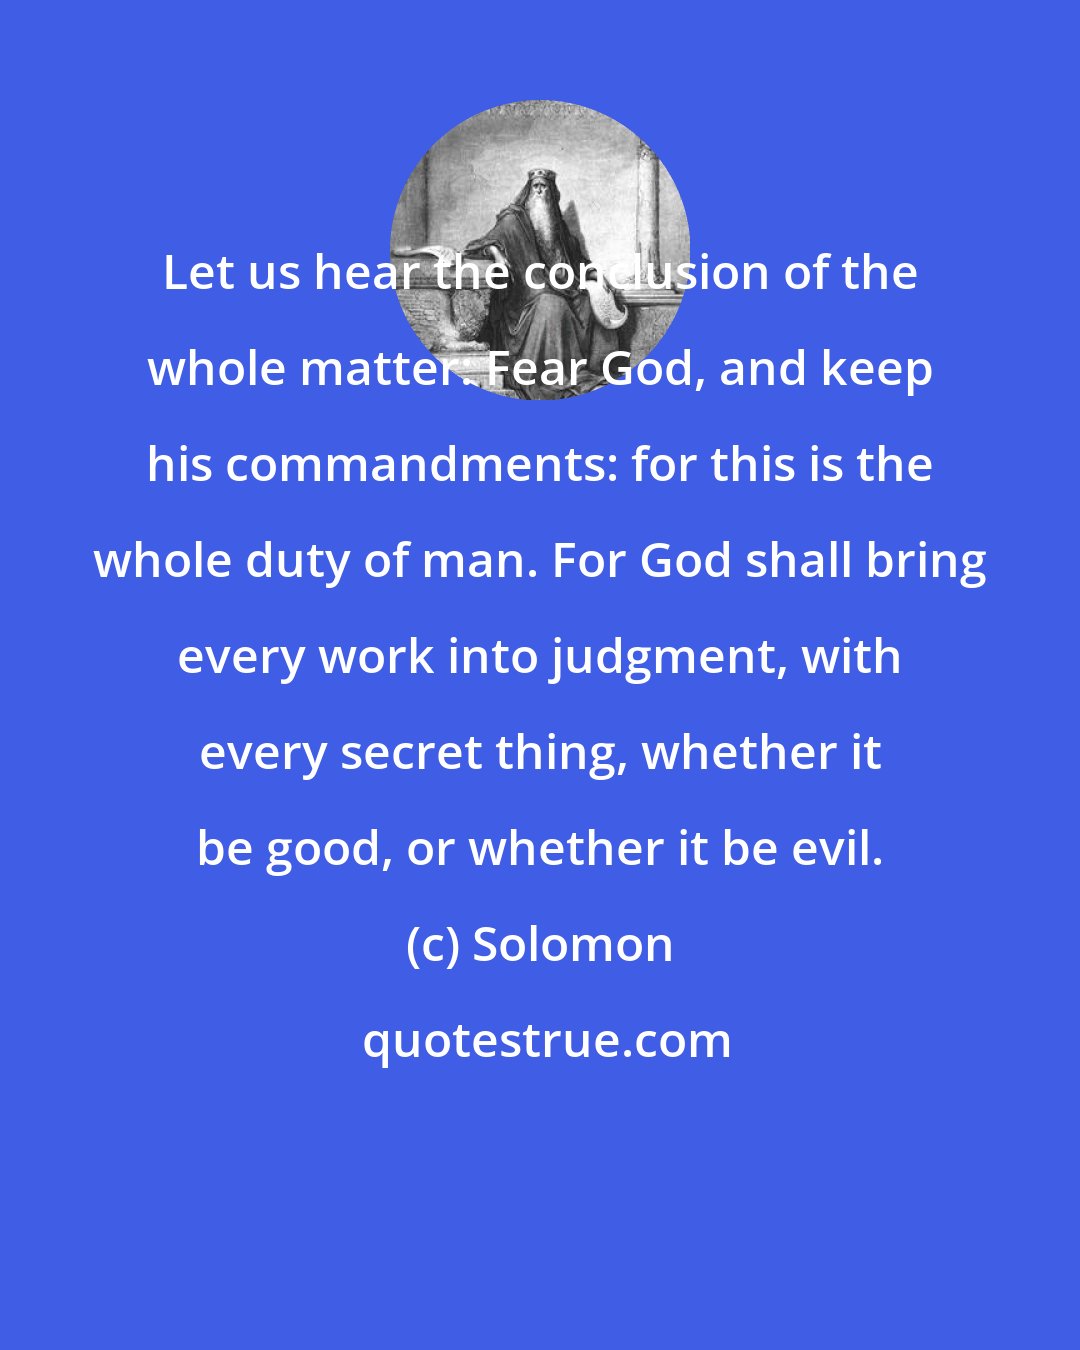 Solomon: Let us hear the conclusion of the whole matter: Fear God, and keep his commandments: for this is the whole duty of man. For God shall bring every work into judgment, with every secret thing, whether it be good, or whether it be evil.